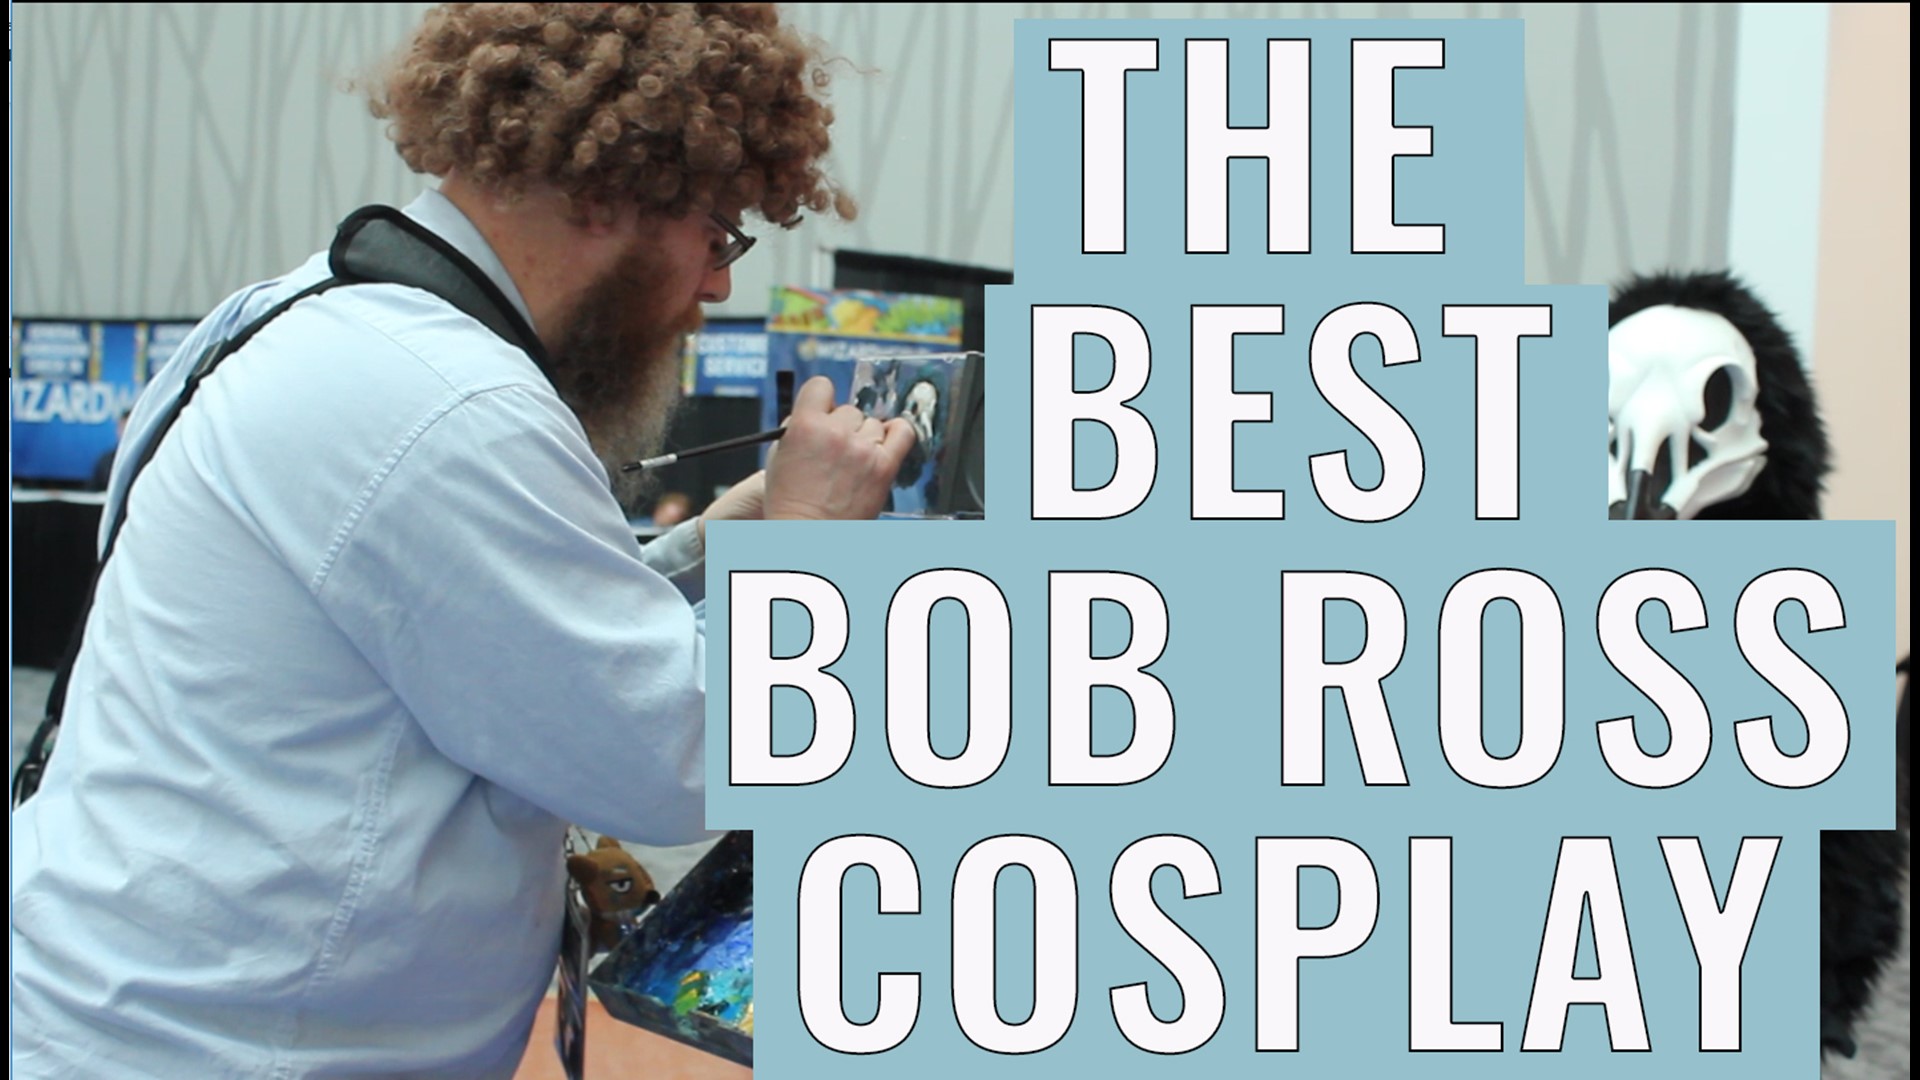 Simran Gleason is a full-time nerd and artist. He dresses up as Bob Ross at the Portland Metro comic cons and paints portraits of other cosplayers for free!